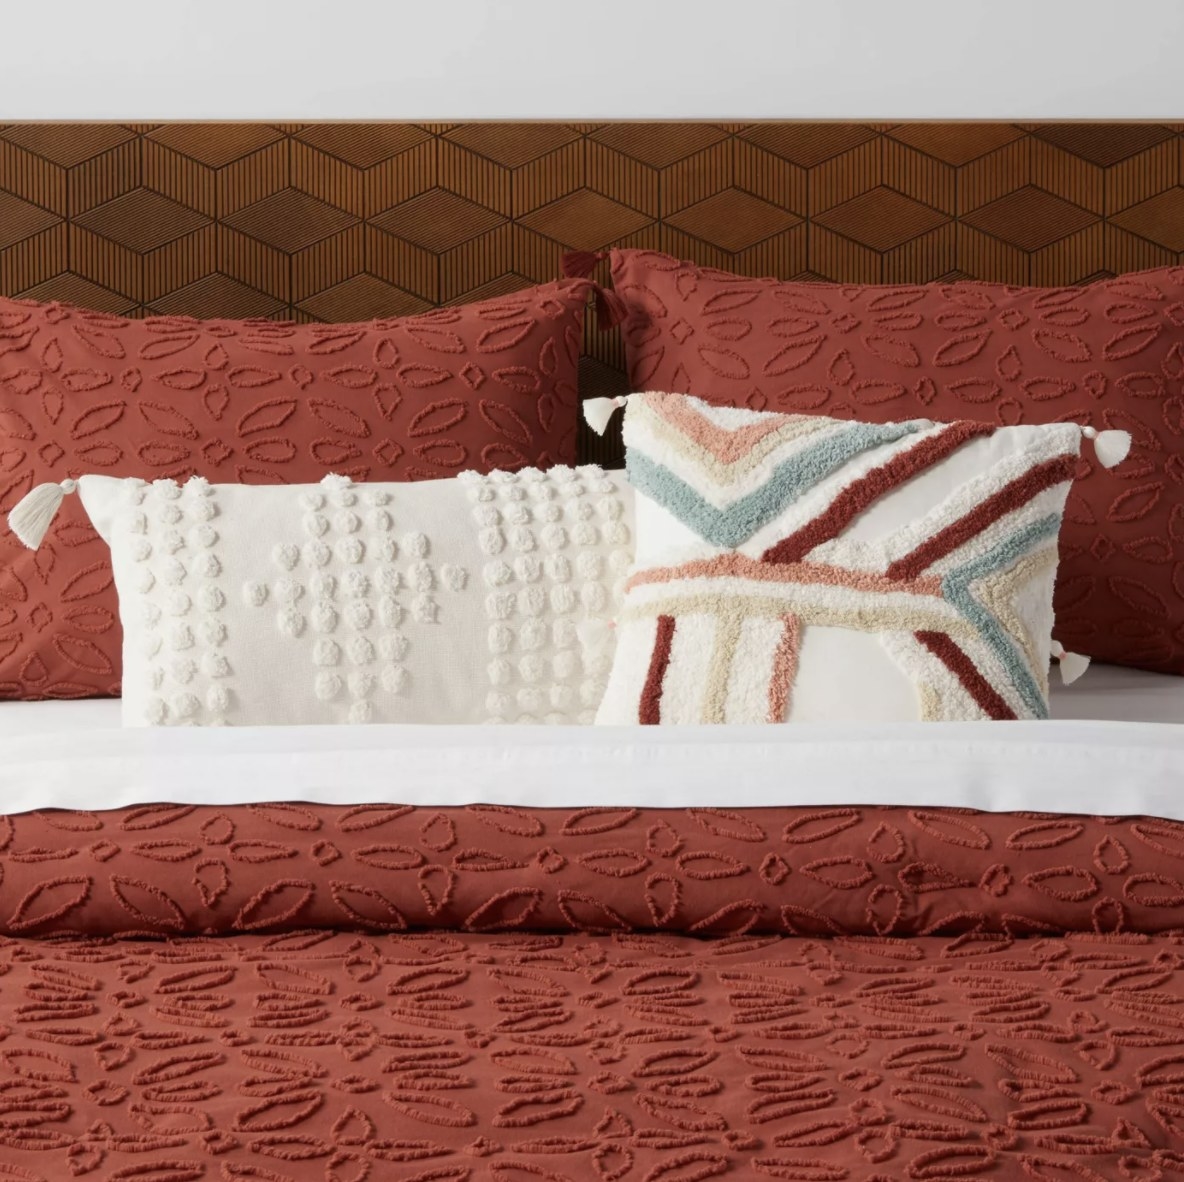 The pillow with blue, taupe, maroon and pink detailing is on top of a deep reddish-brown comforter